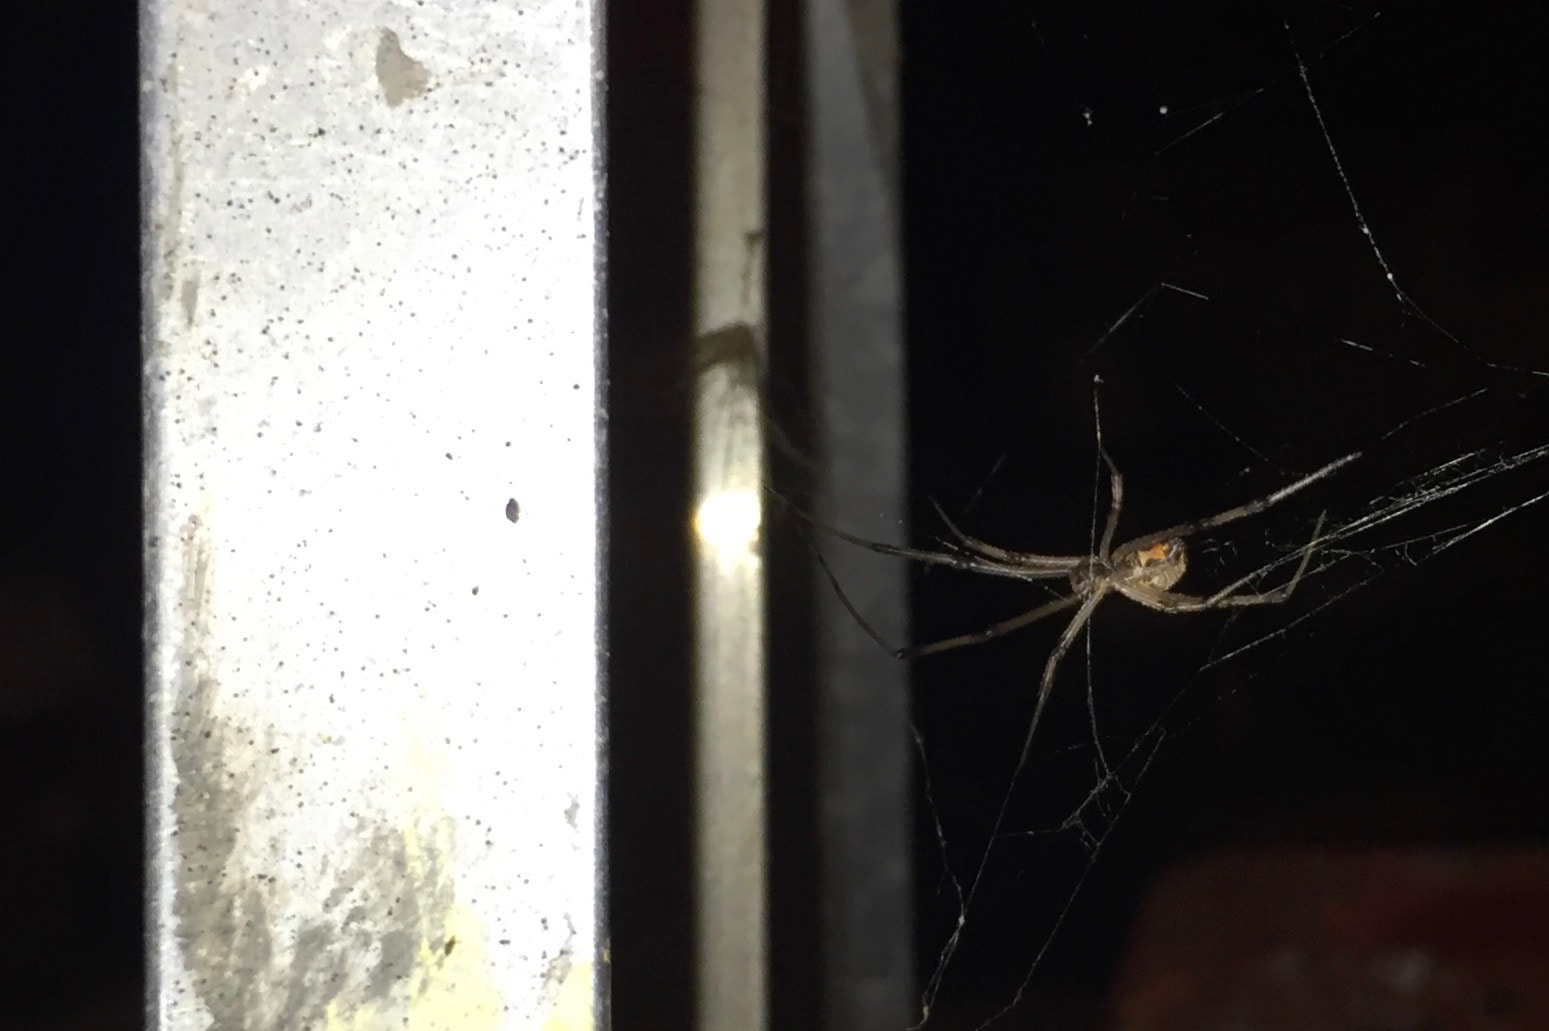 Picture of Latrodectus geometricus (Brown Widow Spider) - Ventral,Webs